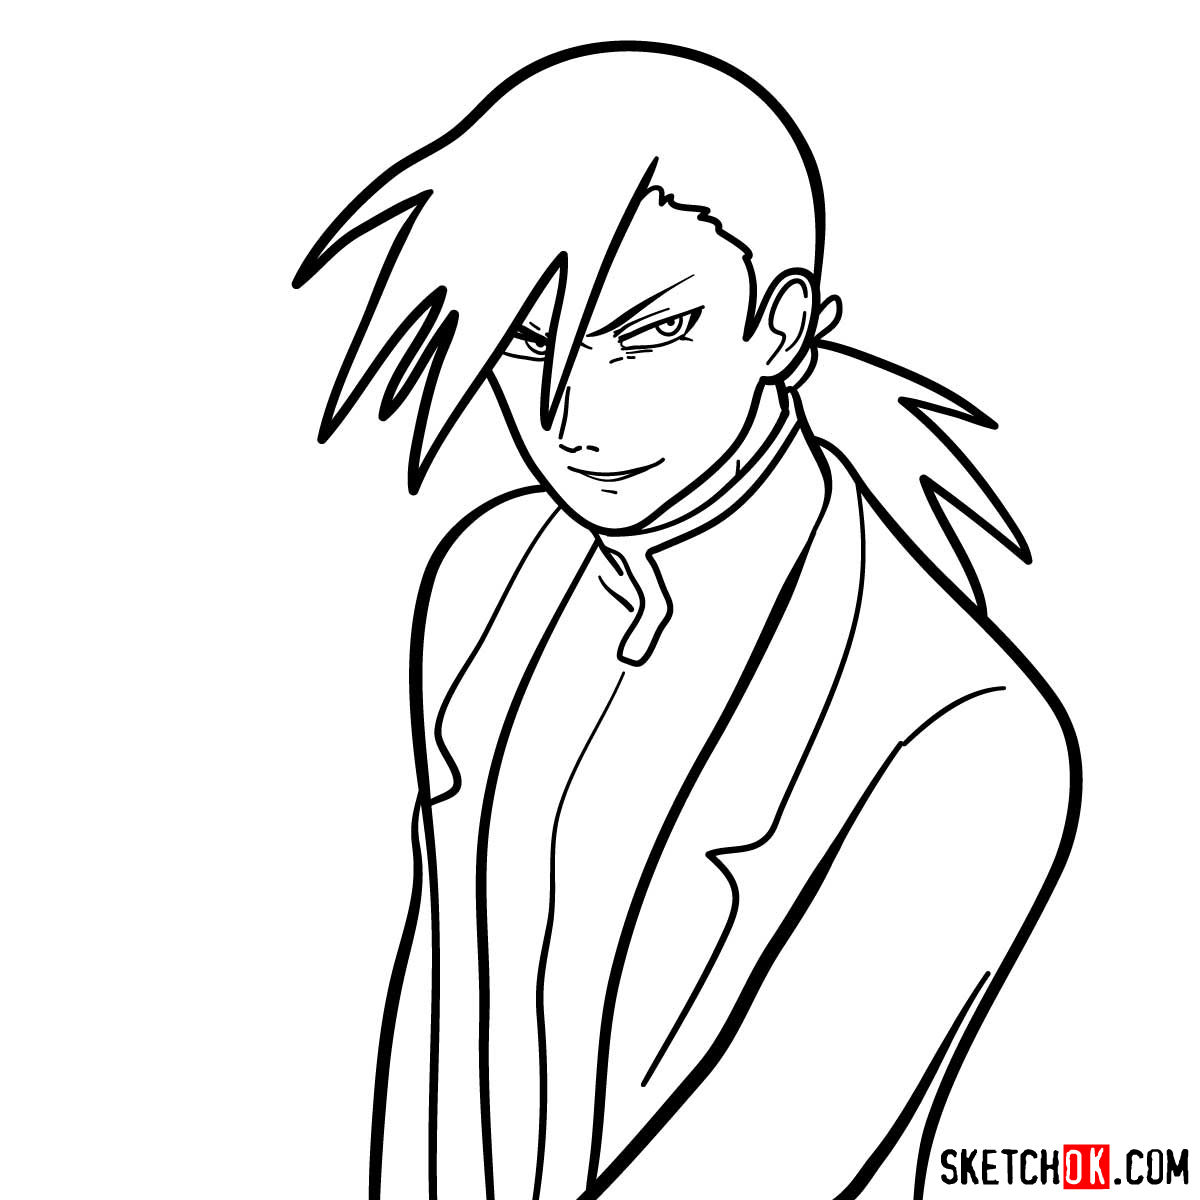 How to draw Greed from Fullmetal Alchemist